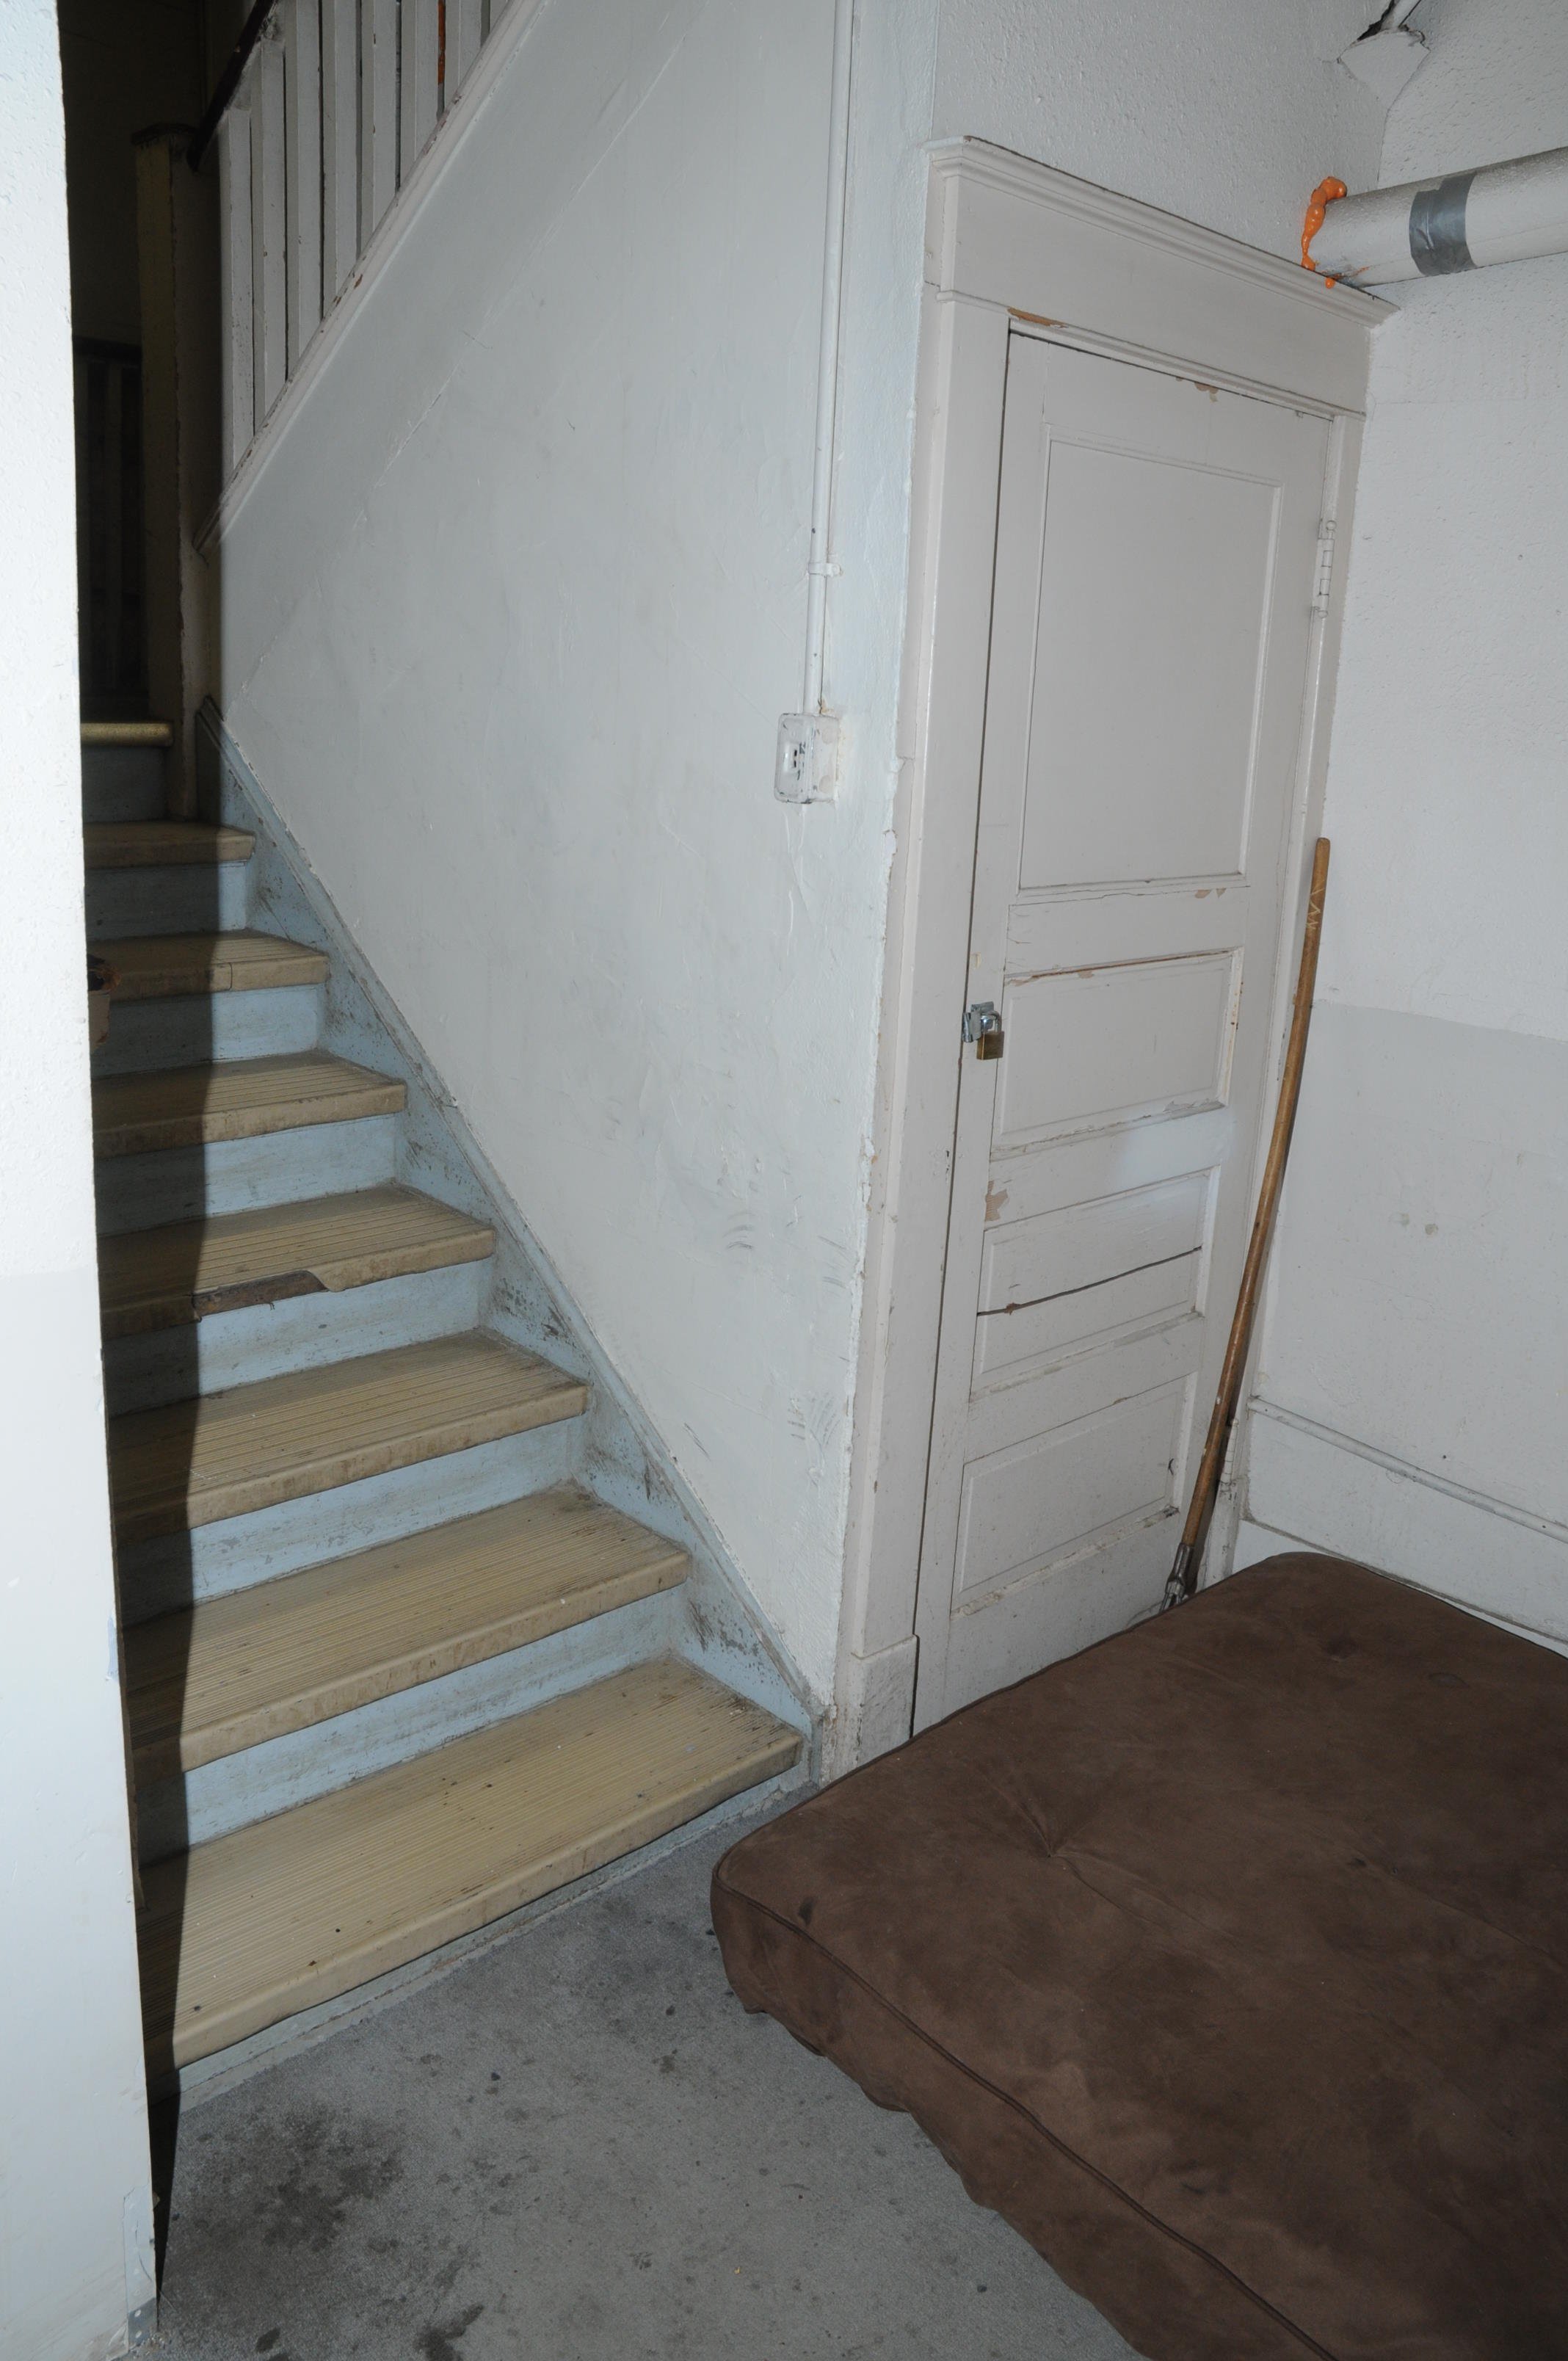 Single closed room at the bottom of a stairwell and a brown mattress on the floor, door is locked with a key lock.